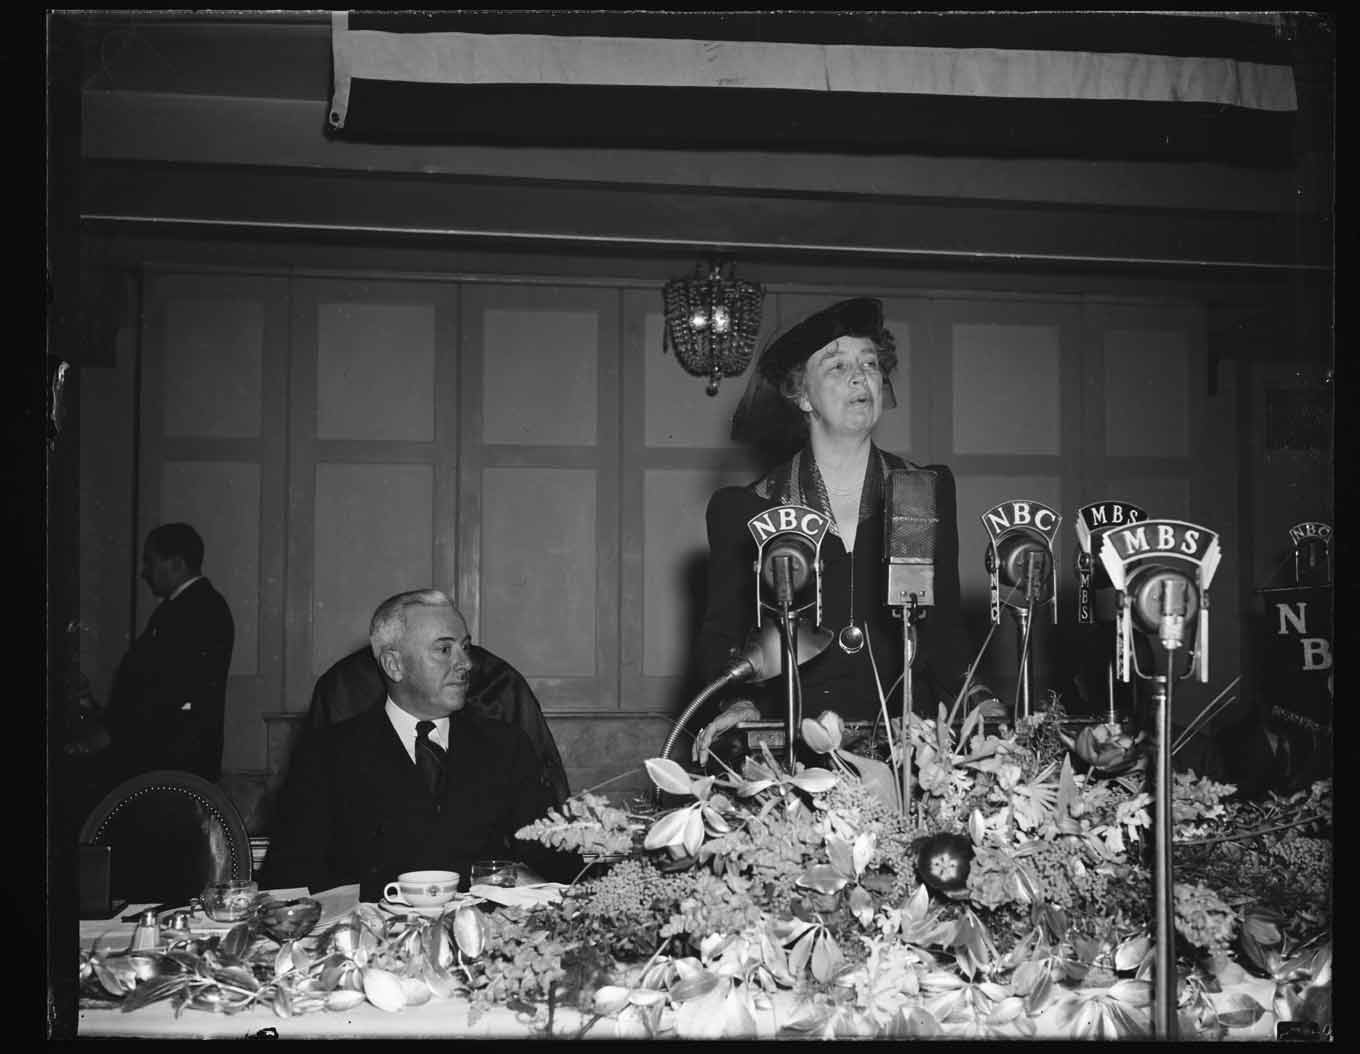 Eleanor Roosevelt talking in a press conference while standing up with a seated Franklin D. Roosevelt at her side